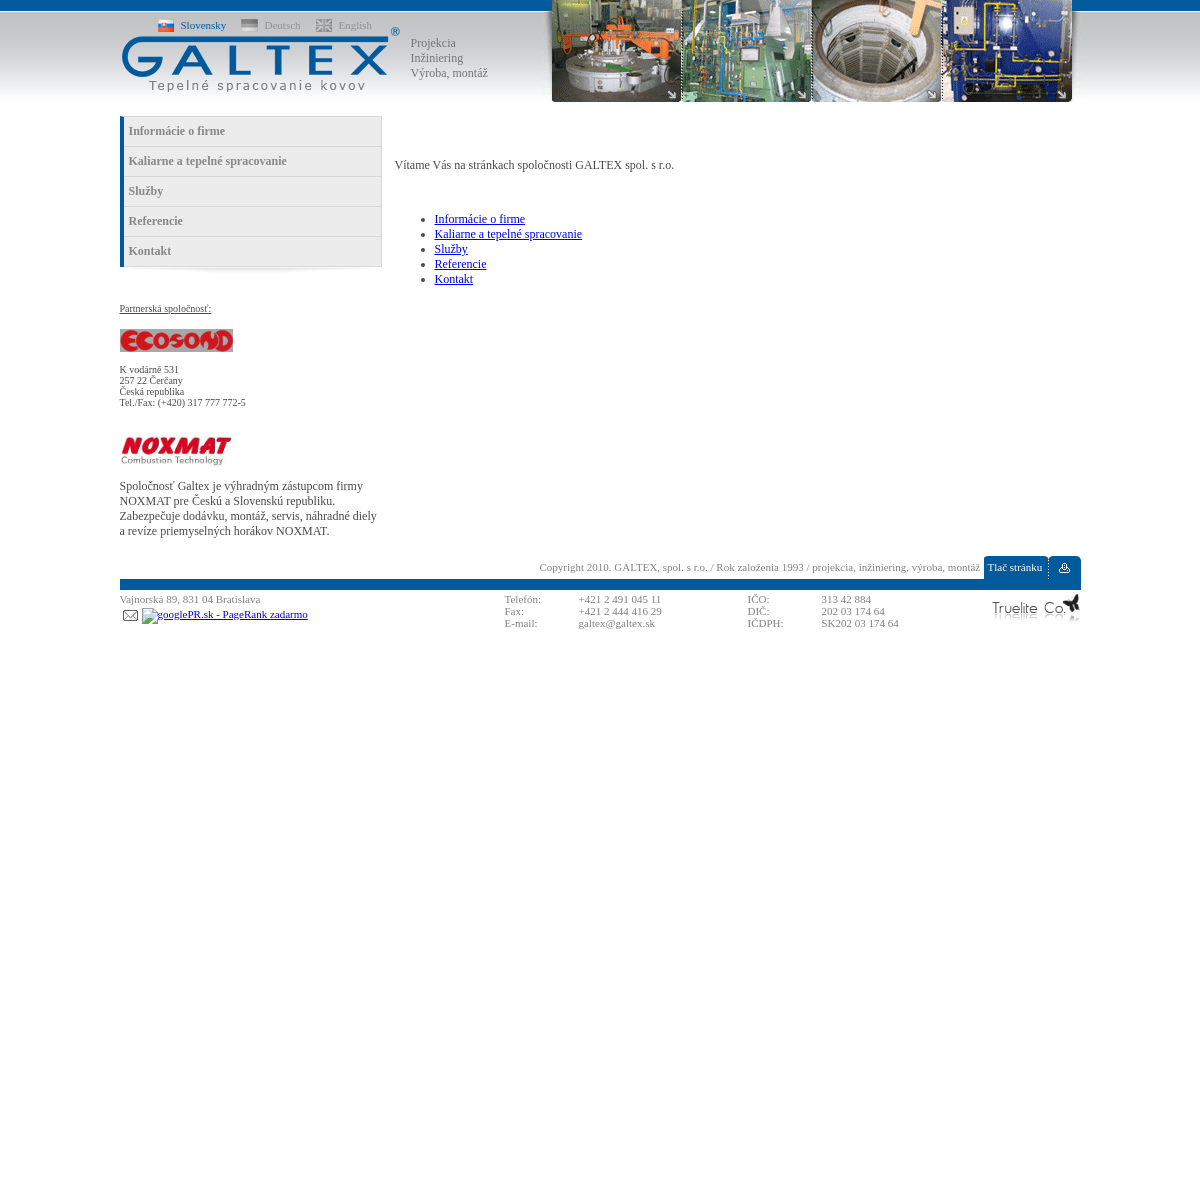 A complete backup of galtex.sk